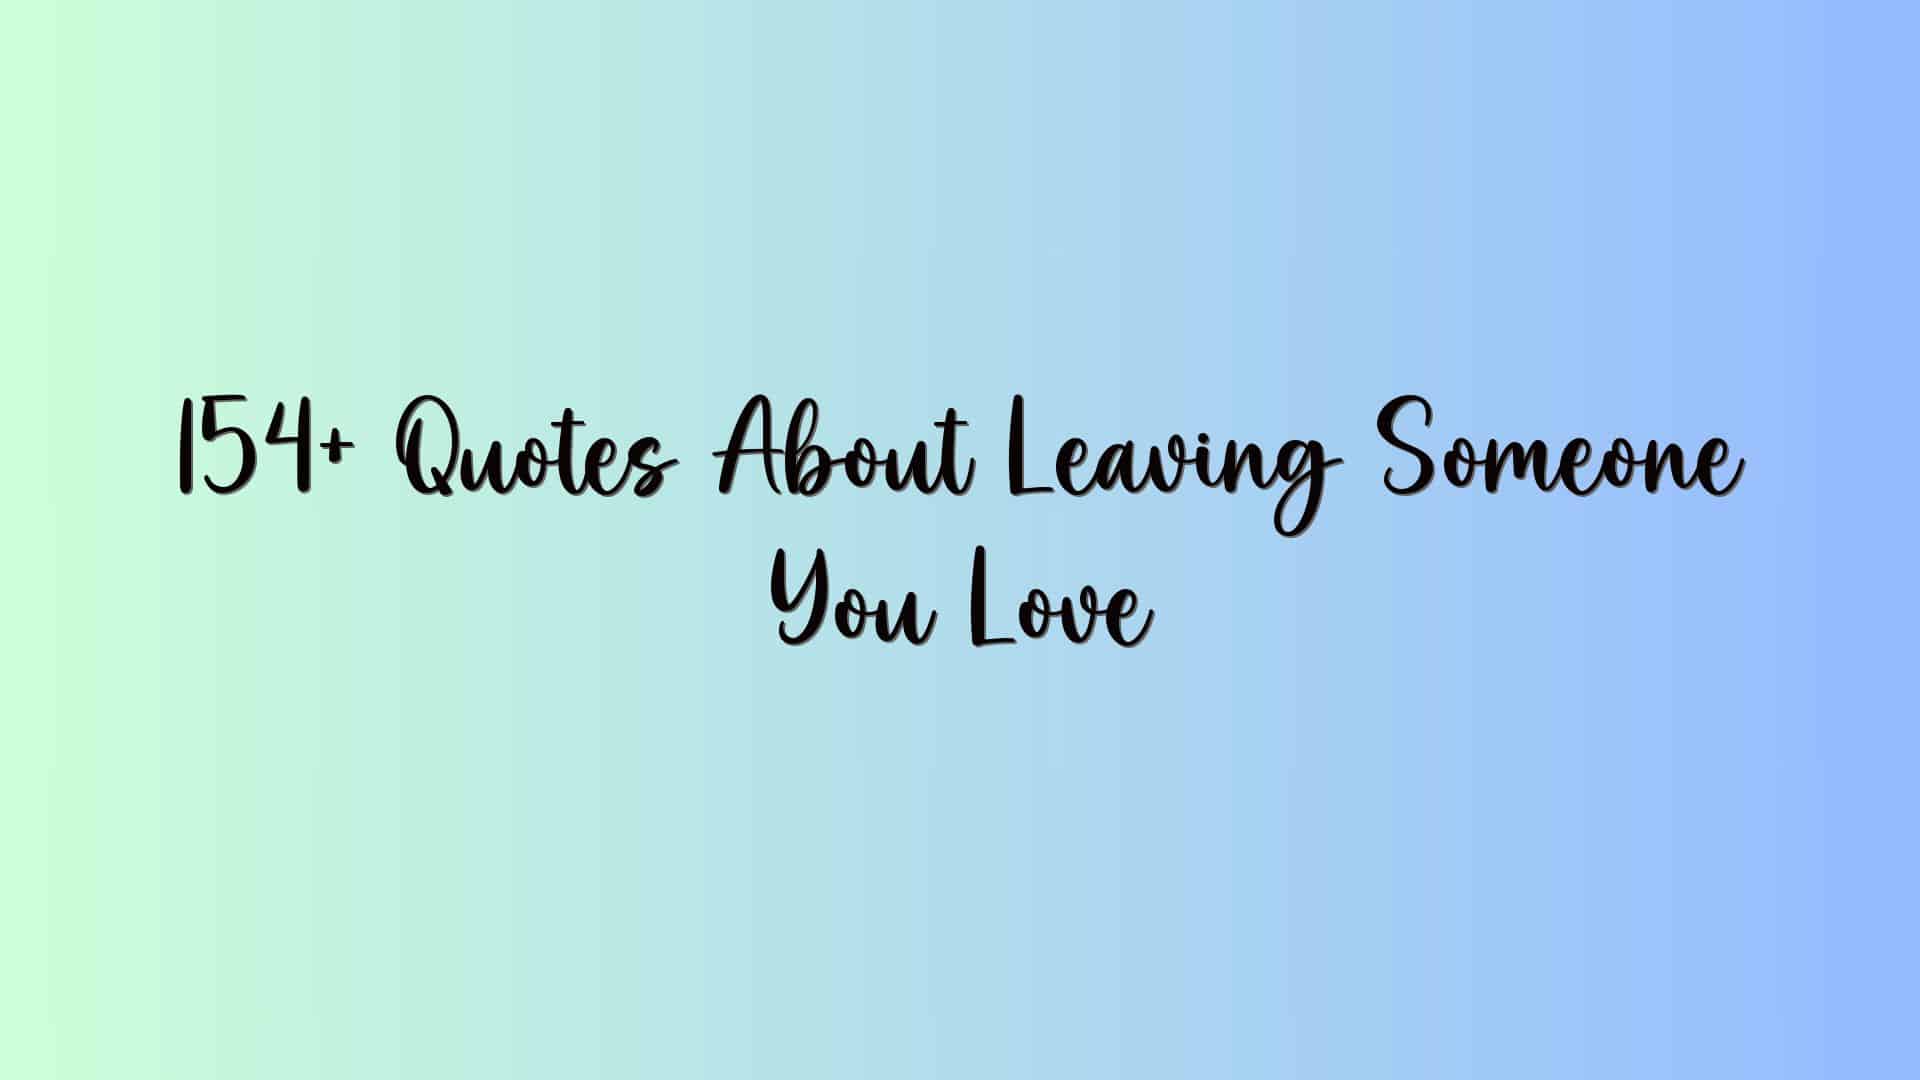 154+ Quotes About Leaving Someone You Love